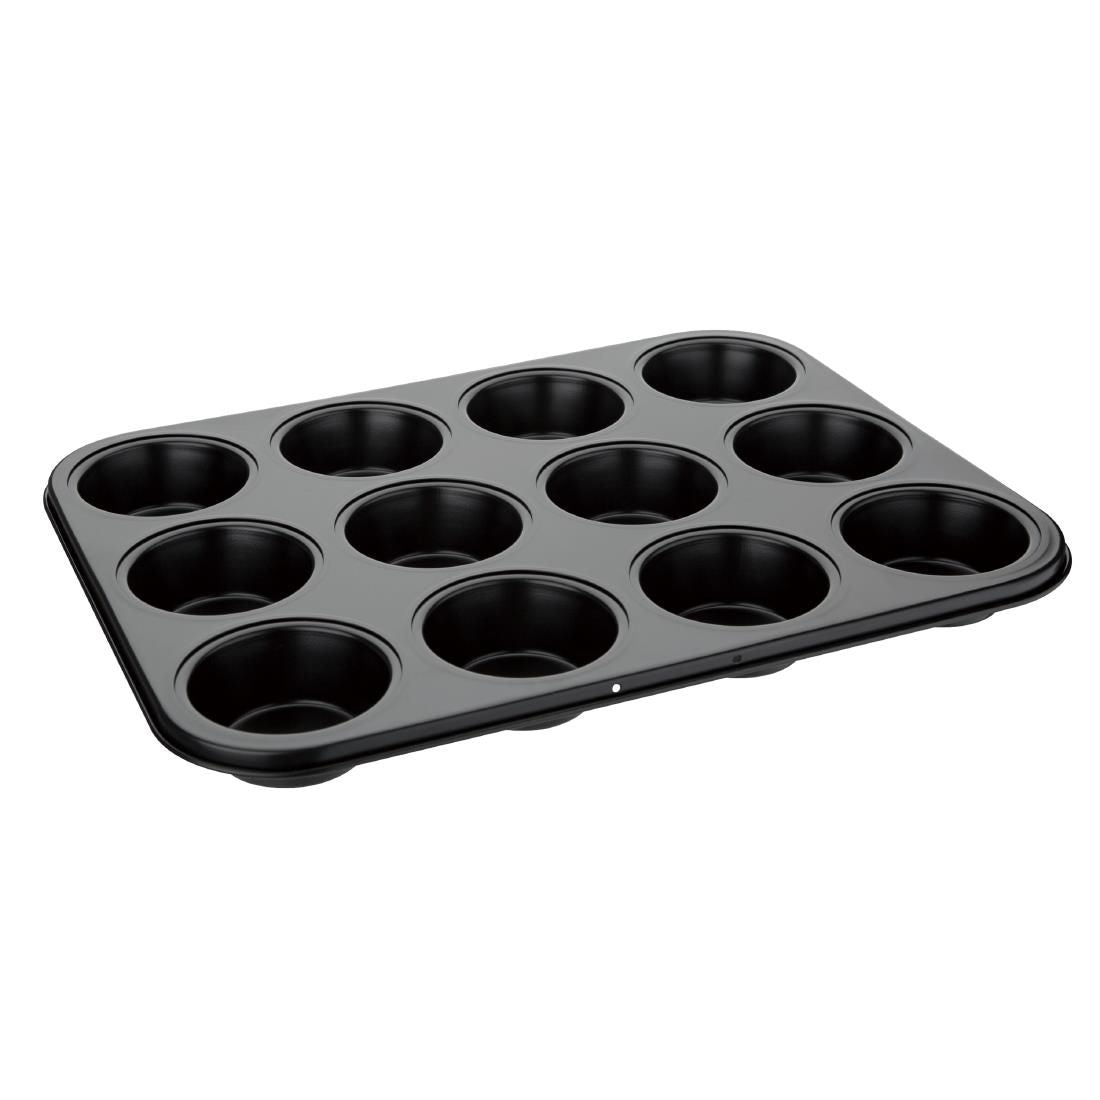 GD011 Vogue Carbon Steel Non-Stick Muffin Tray 12 Cup JD Catering Equipment Solutions Ltd